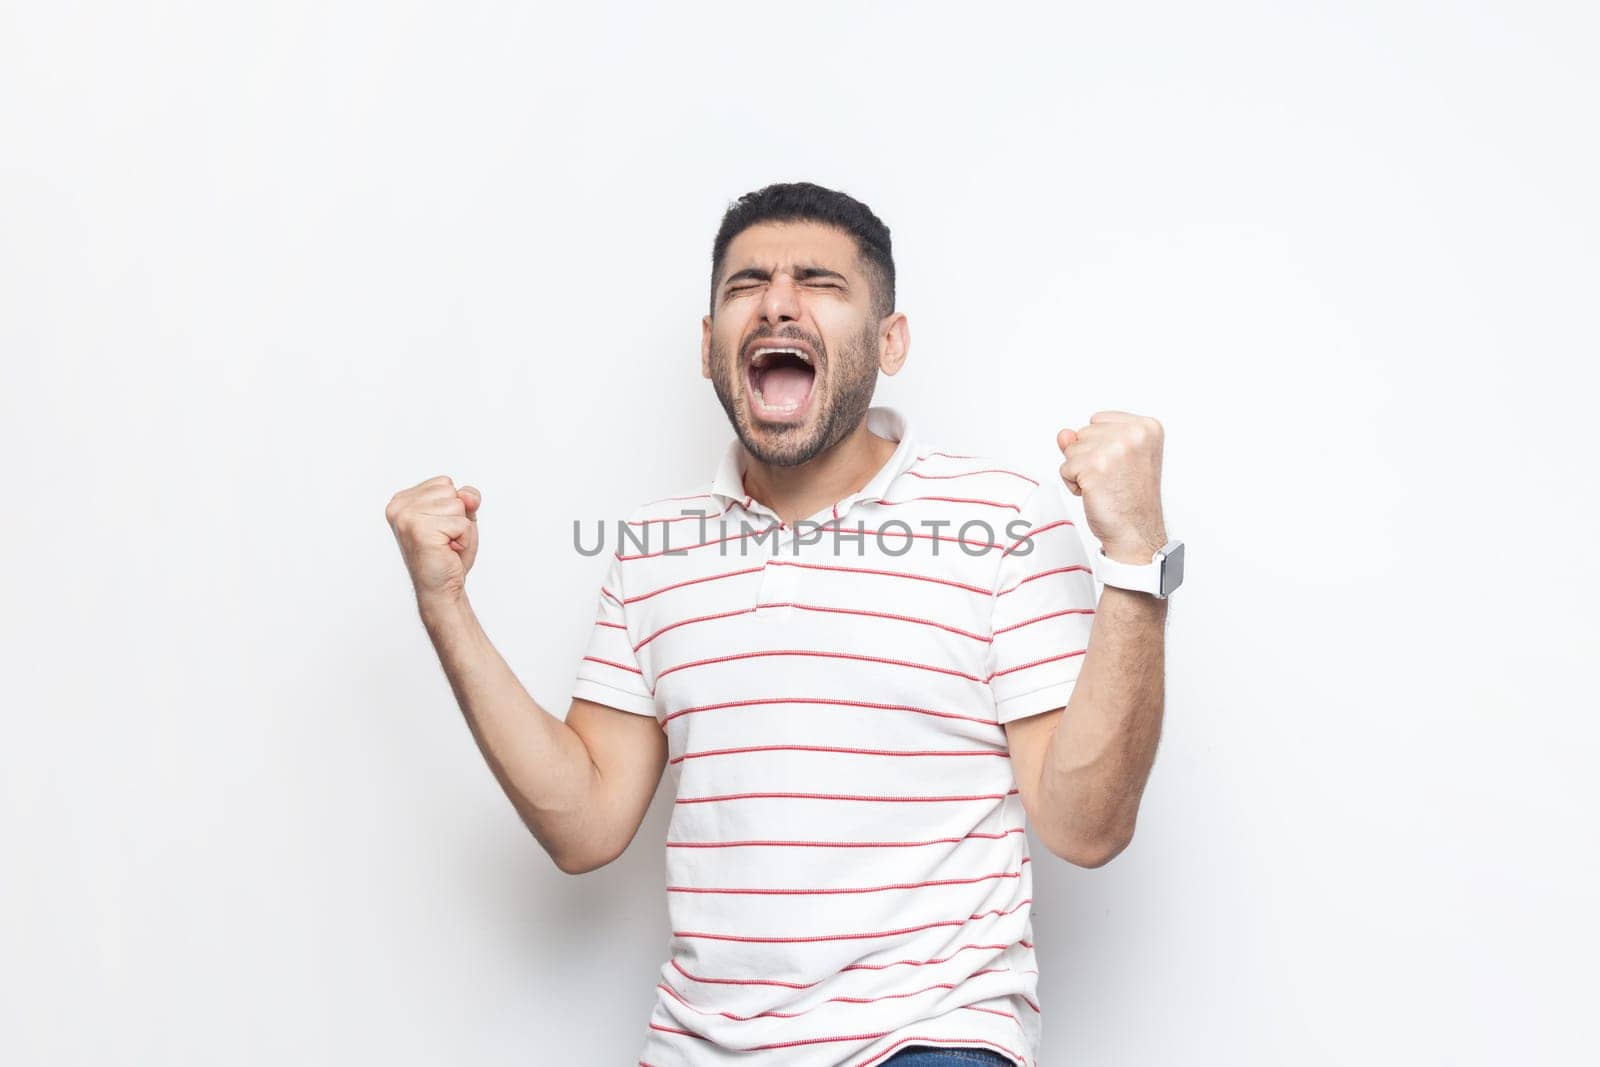 Portrait of extremely happy joyful cheerful bearded man wearing striped t-shirt standing with clenched raised fists, screaming, celebrating victory. Indoor studio shot isolated on gray background.